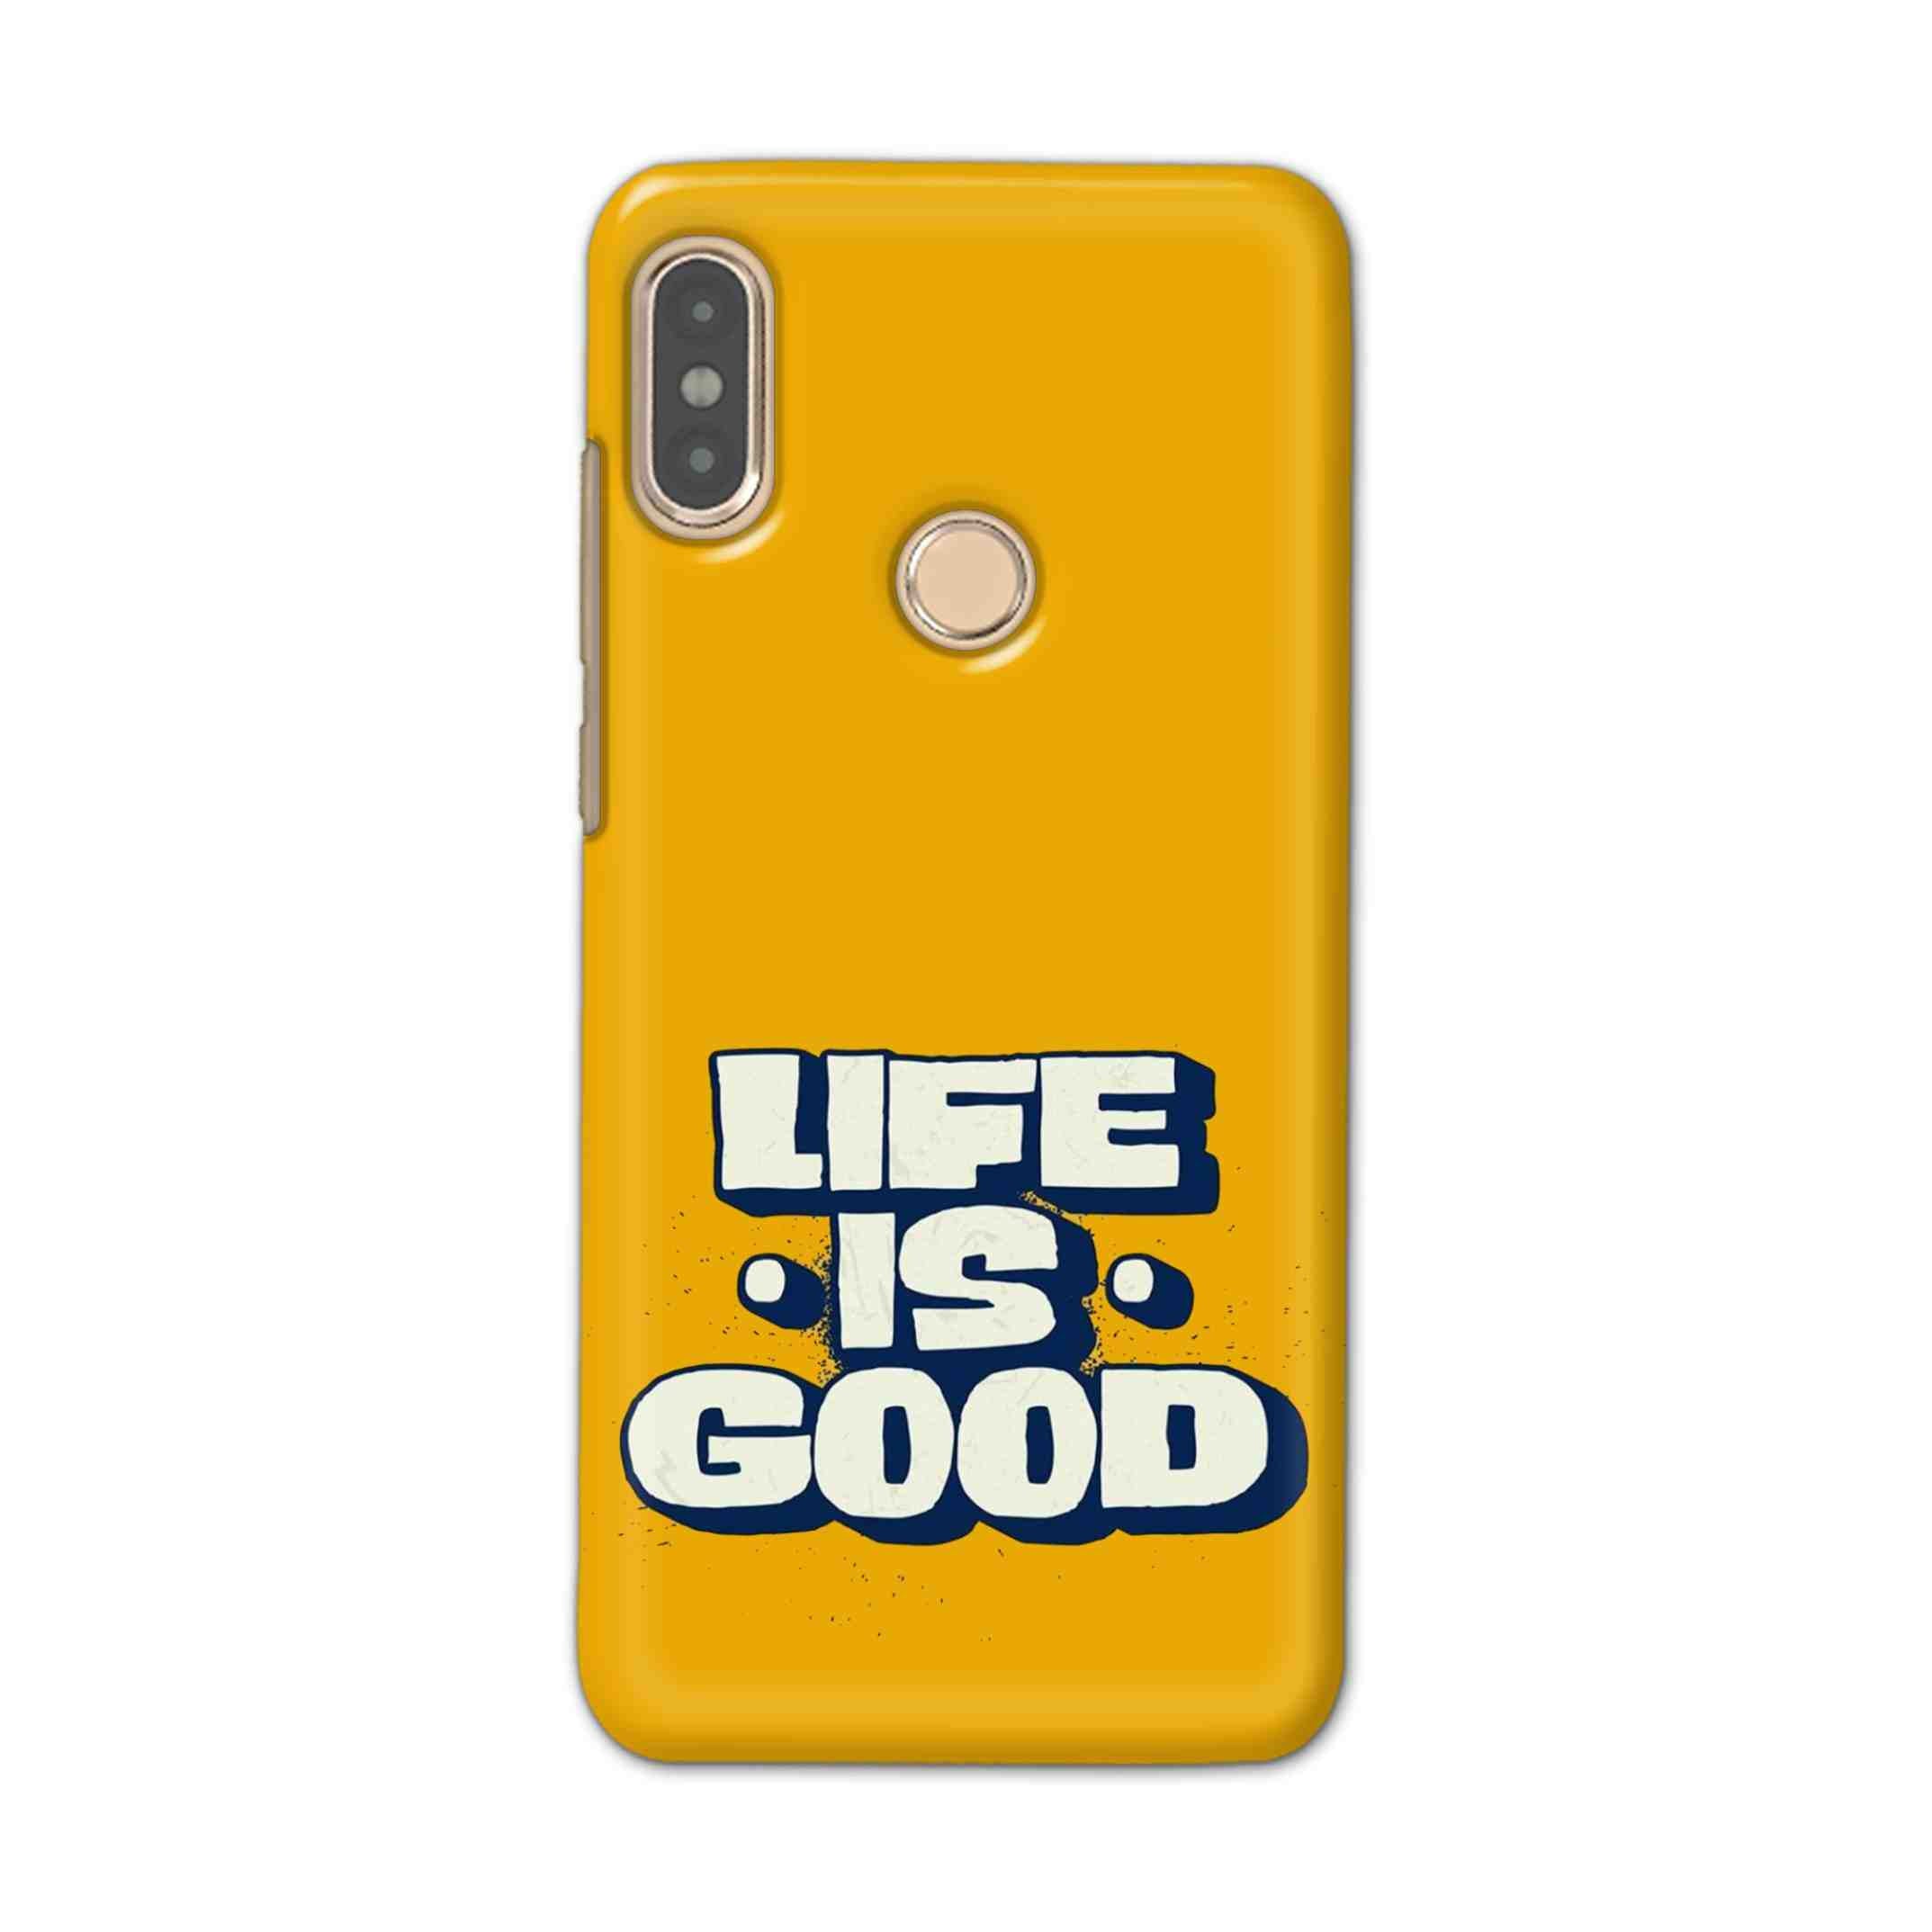 Buy Life Is Good Hard Back Mobile Phone Case Cover For Xiaomi Redmi Note 5 Pro Online